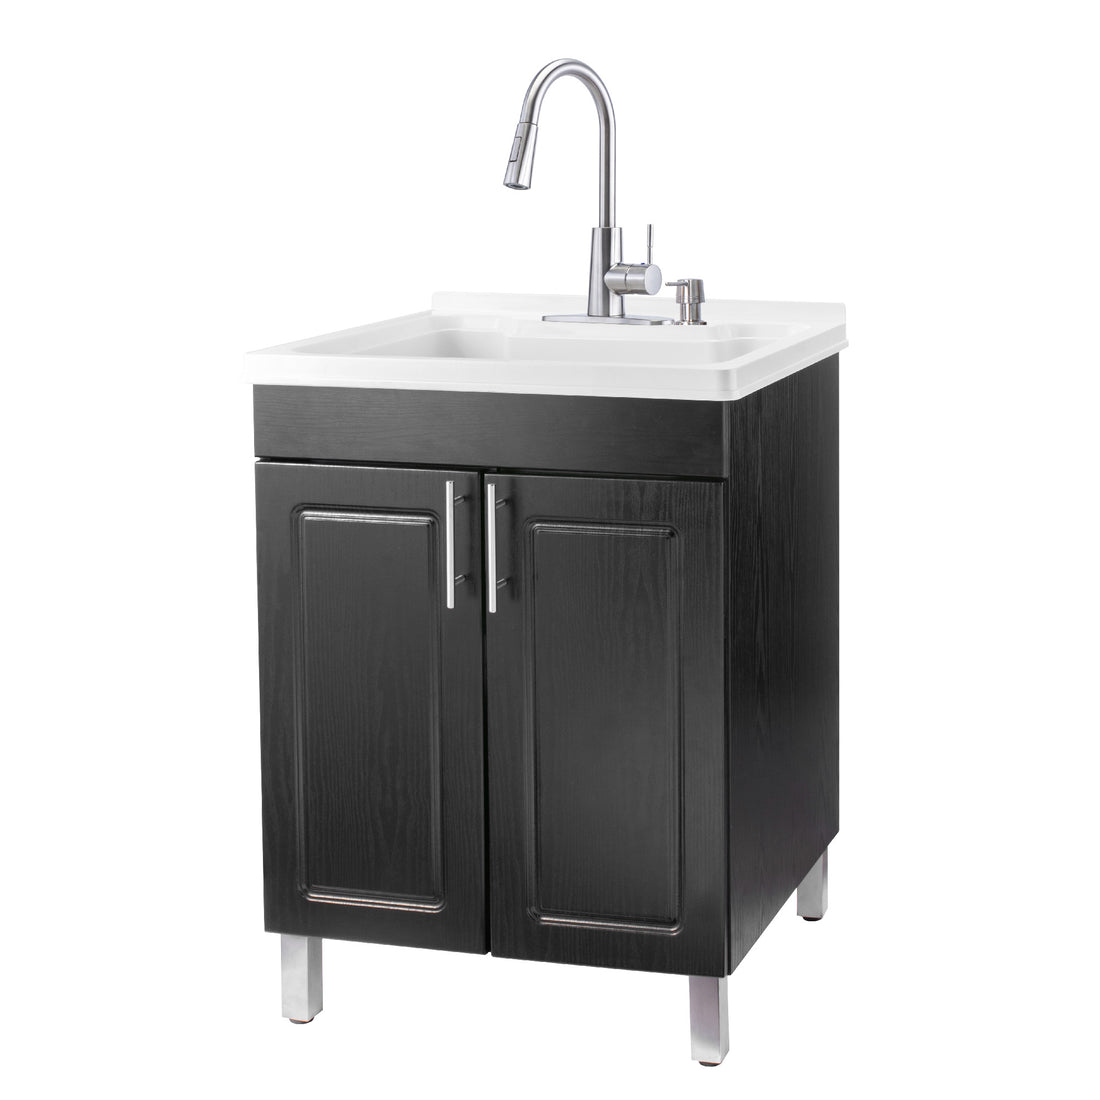 Tehila Black Vanity Cabinet and White Utility Sink with Stainless Steel Finish High-Arc Pull-Down Faucet - Utility sinks vanites Tehila